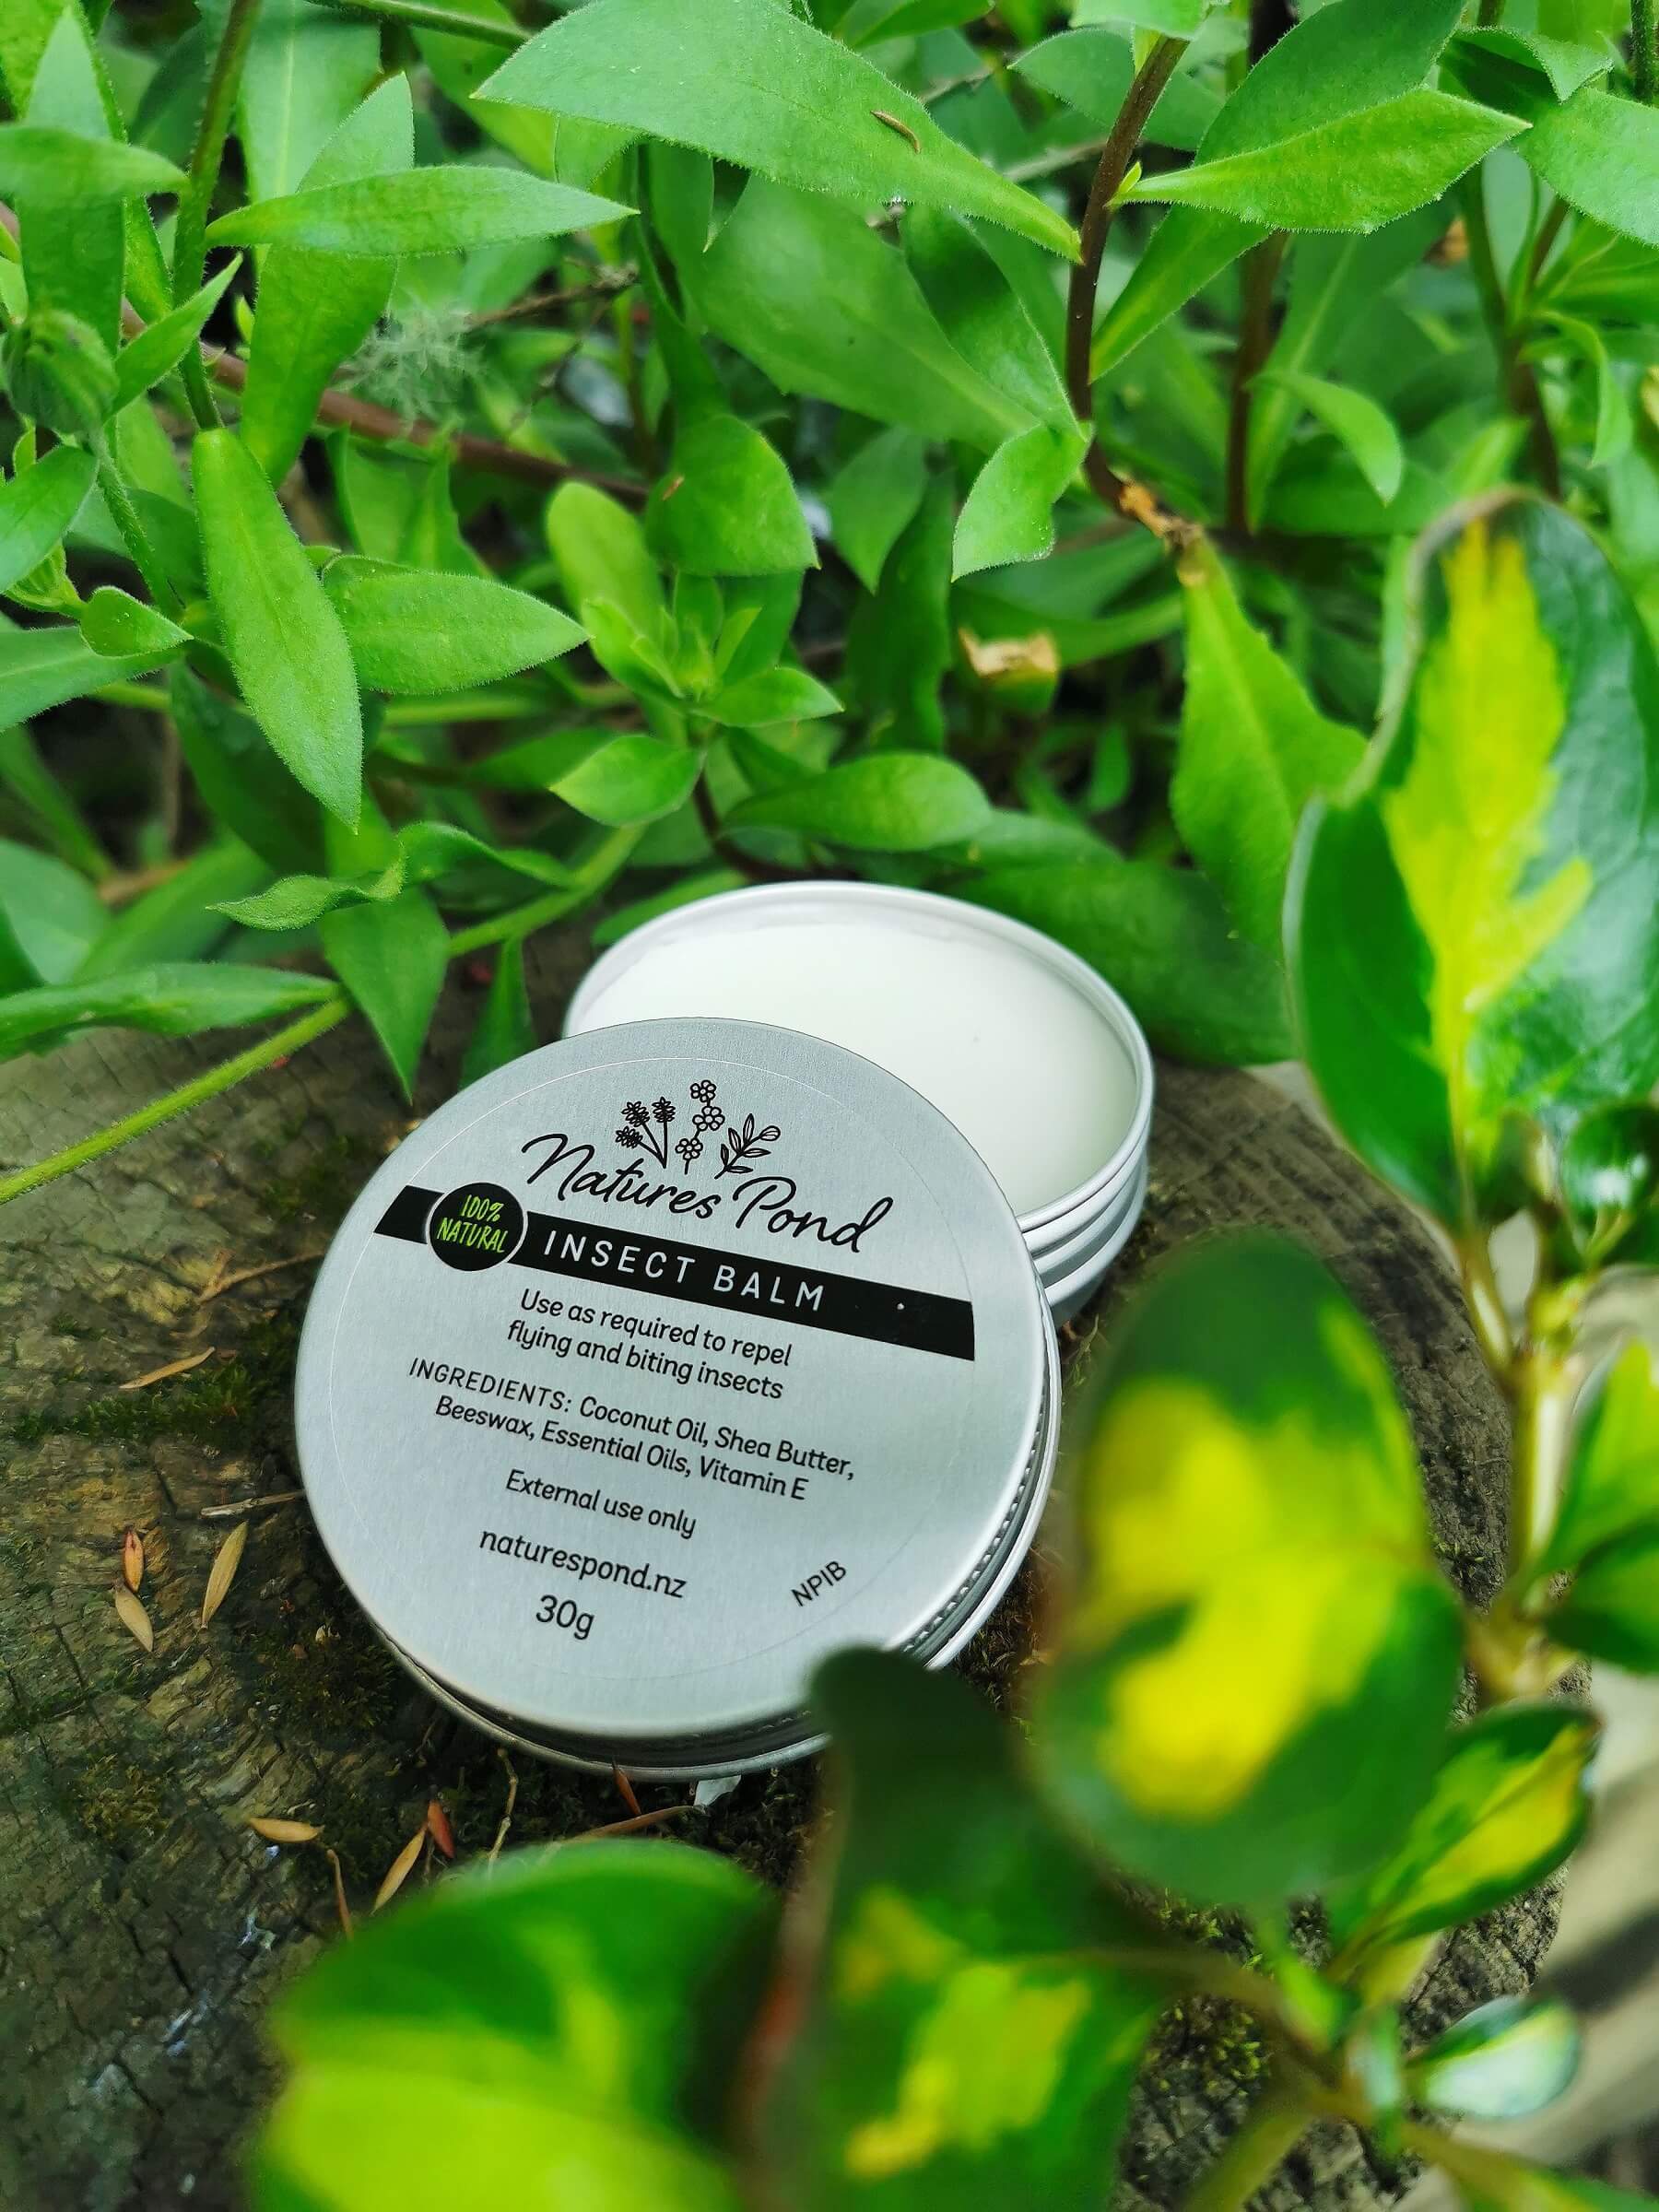 Insect Balm - Natures Pond